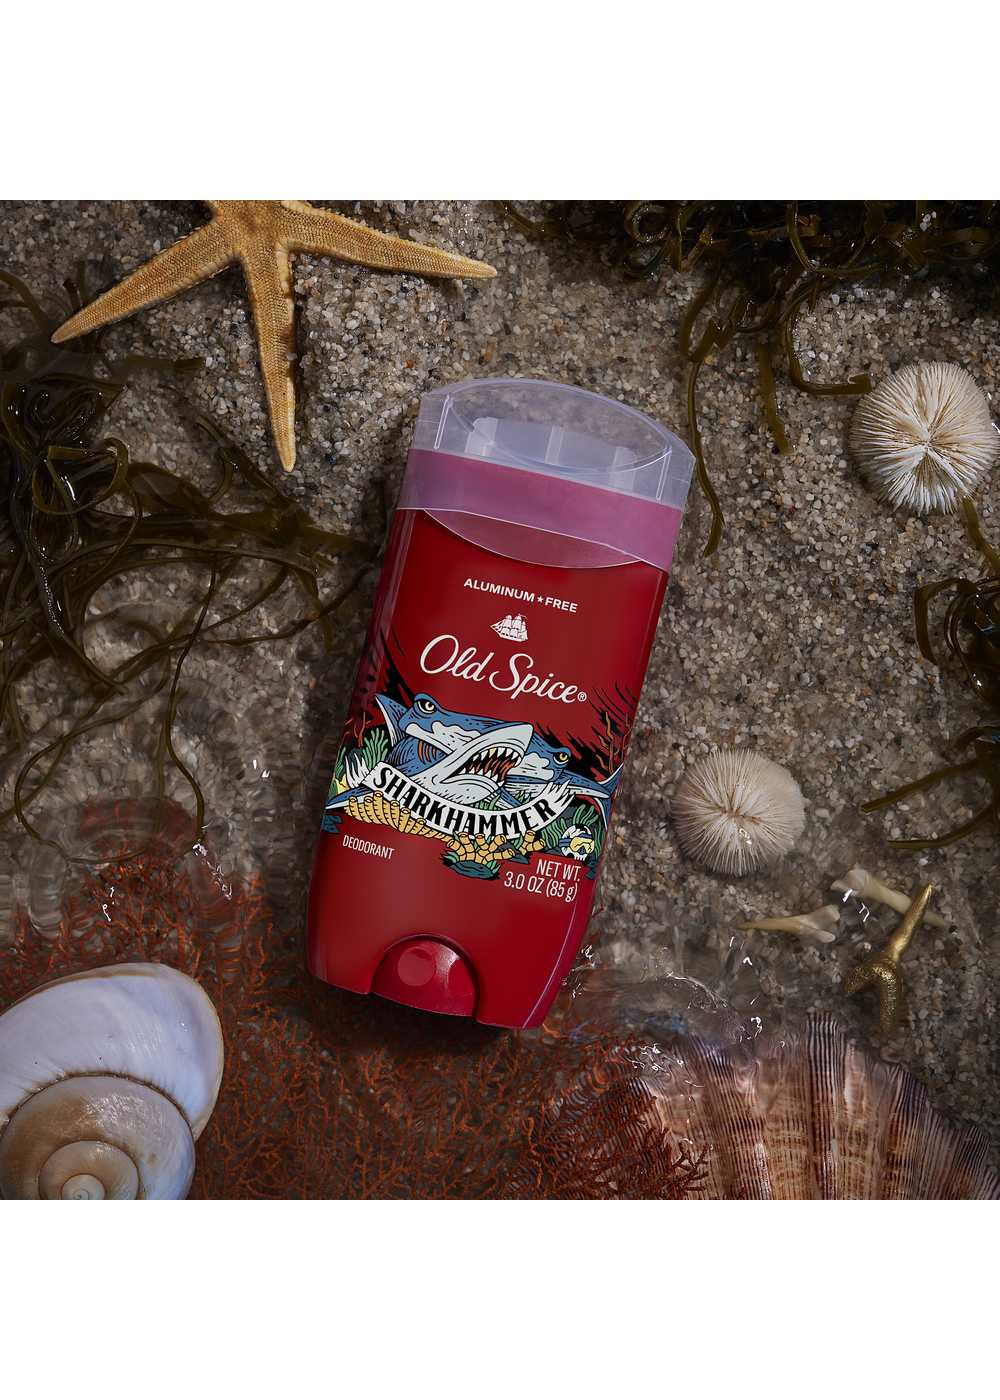 Old Spice Deodorant - Sharkhammer; image 6 of 6